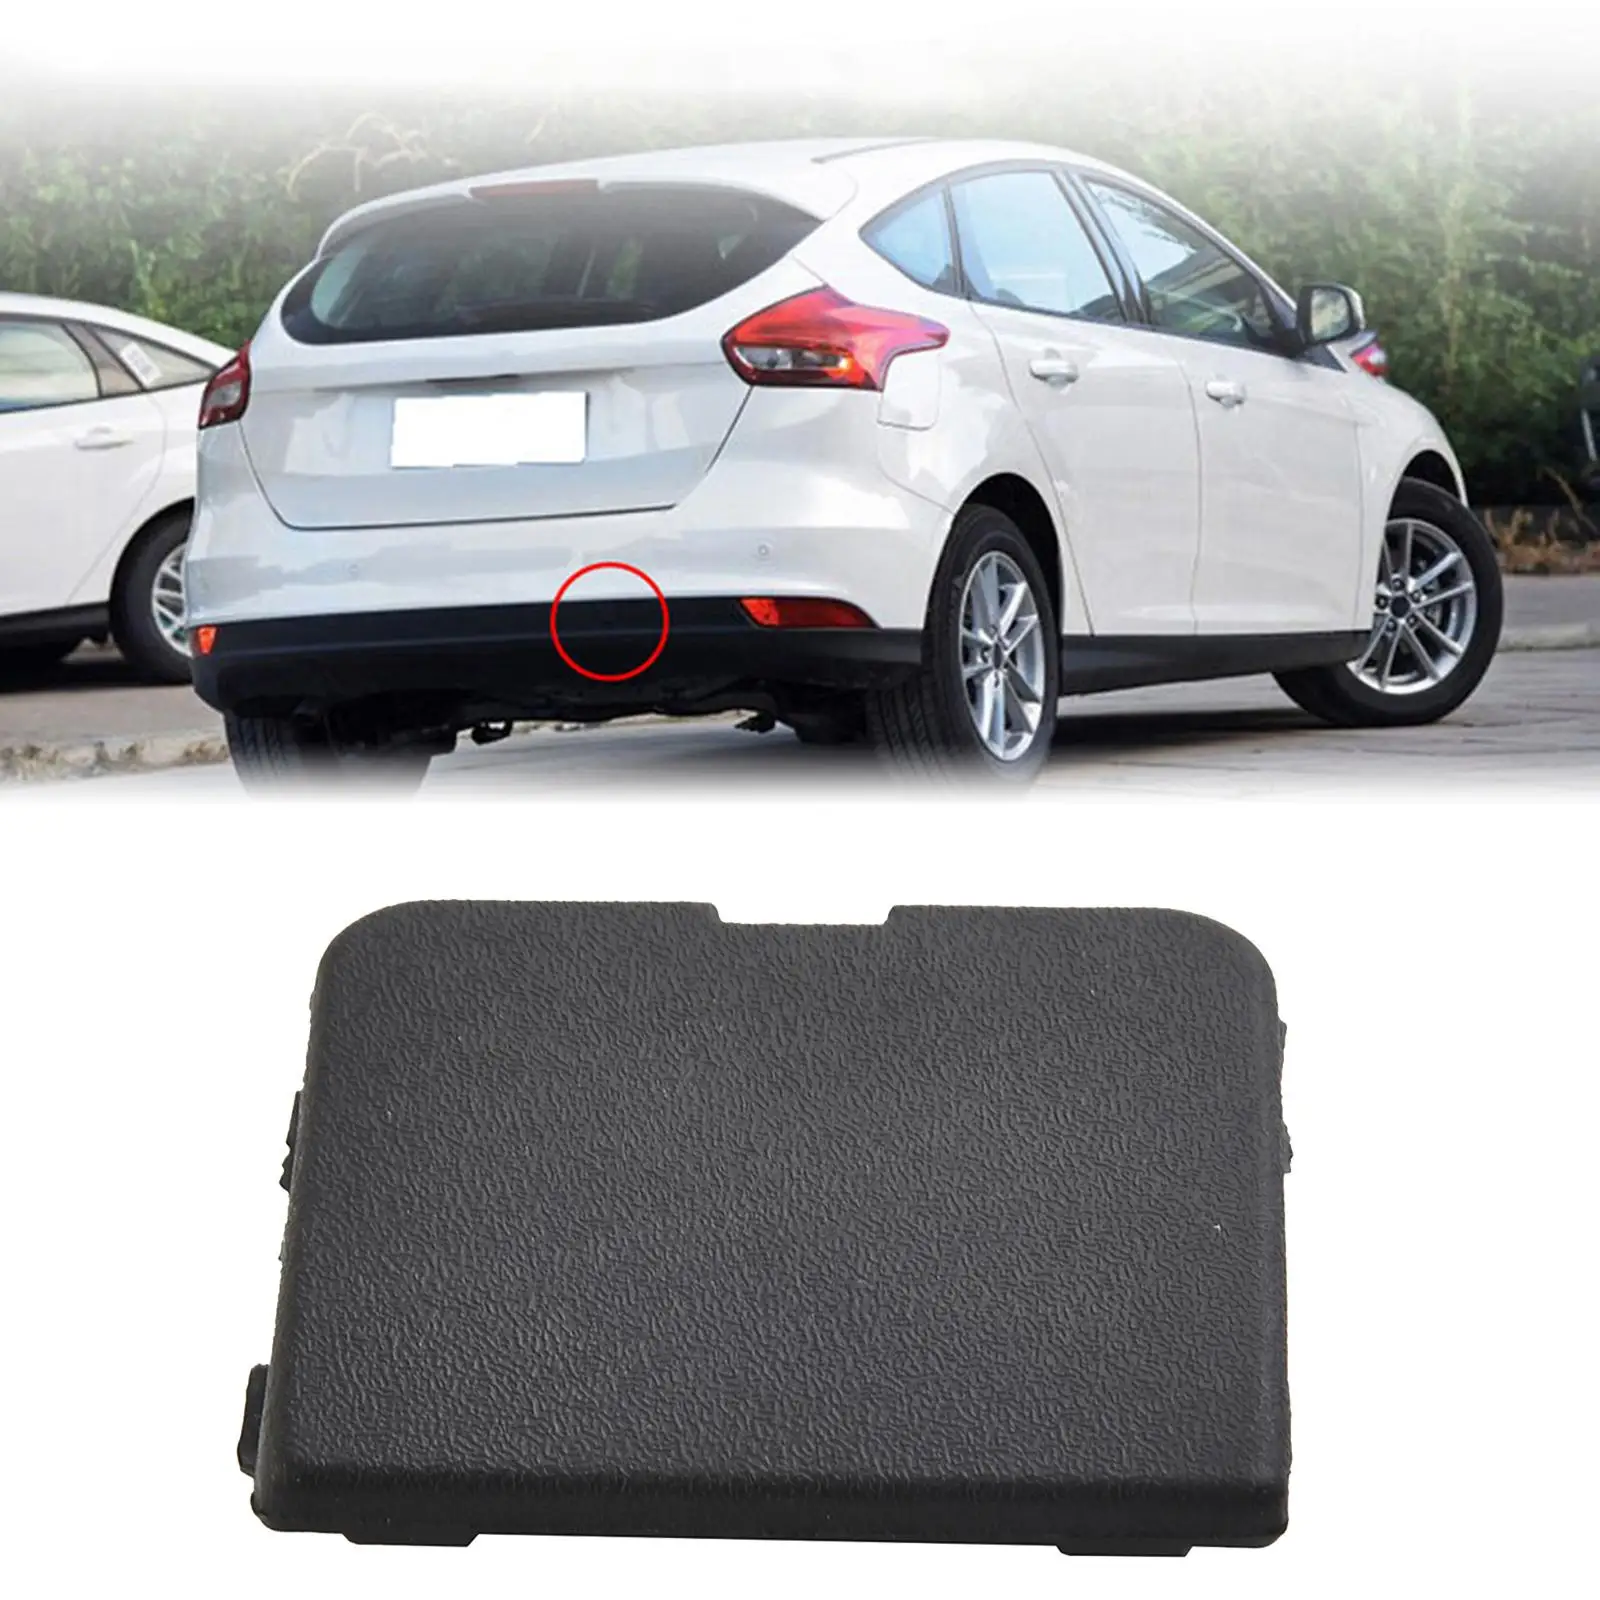 Car Rear Bumper Tow Hook Cover Cap Spare Parts Replacement High Performance 1872237 for Ford Focus Hatchback 2015-2018